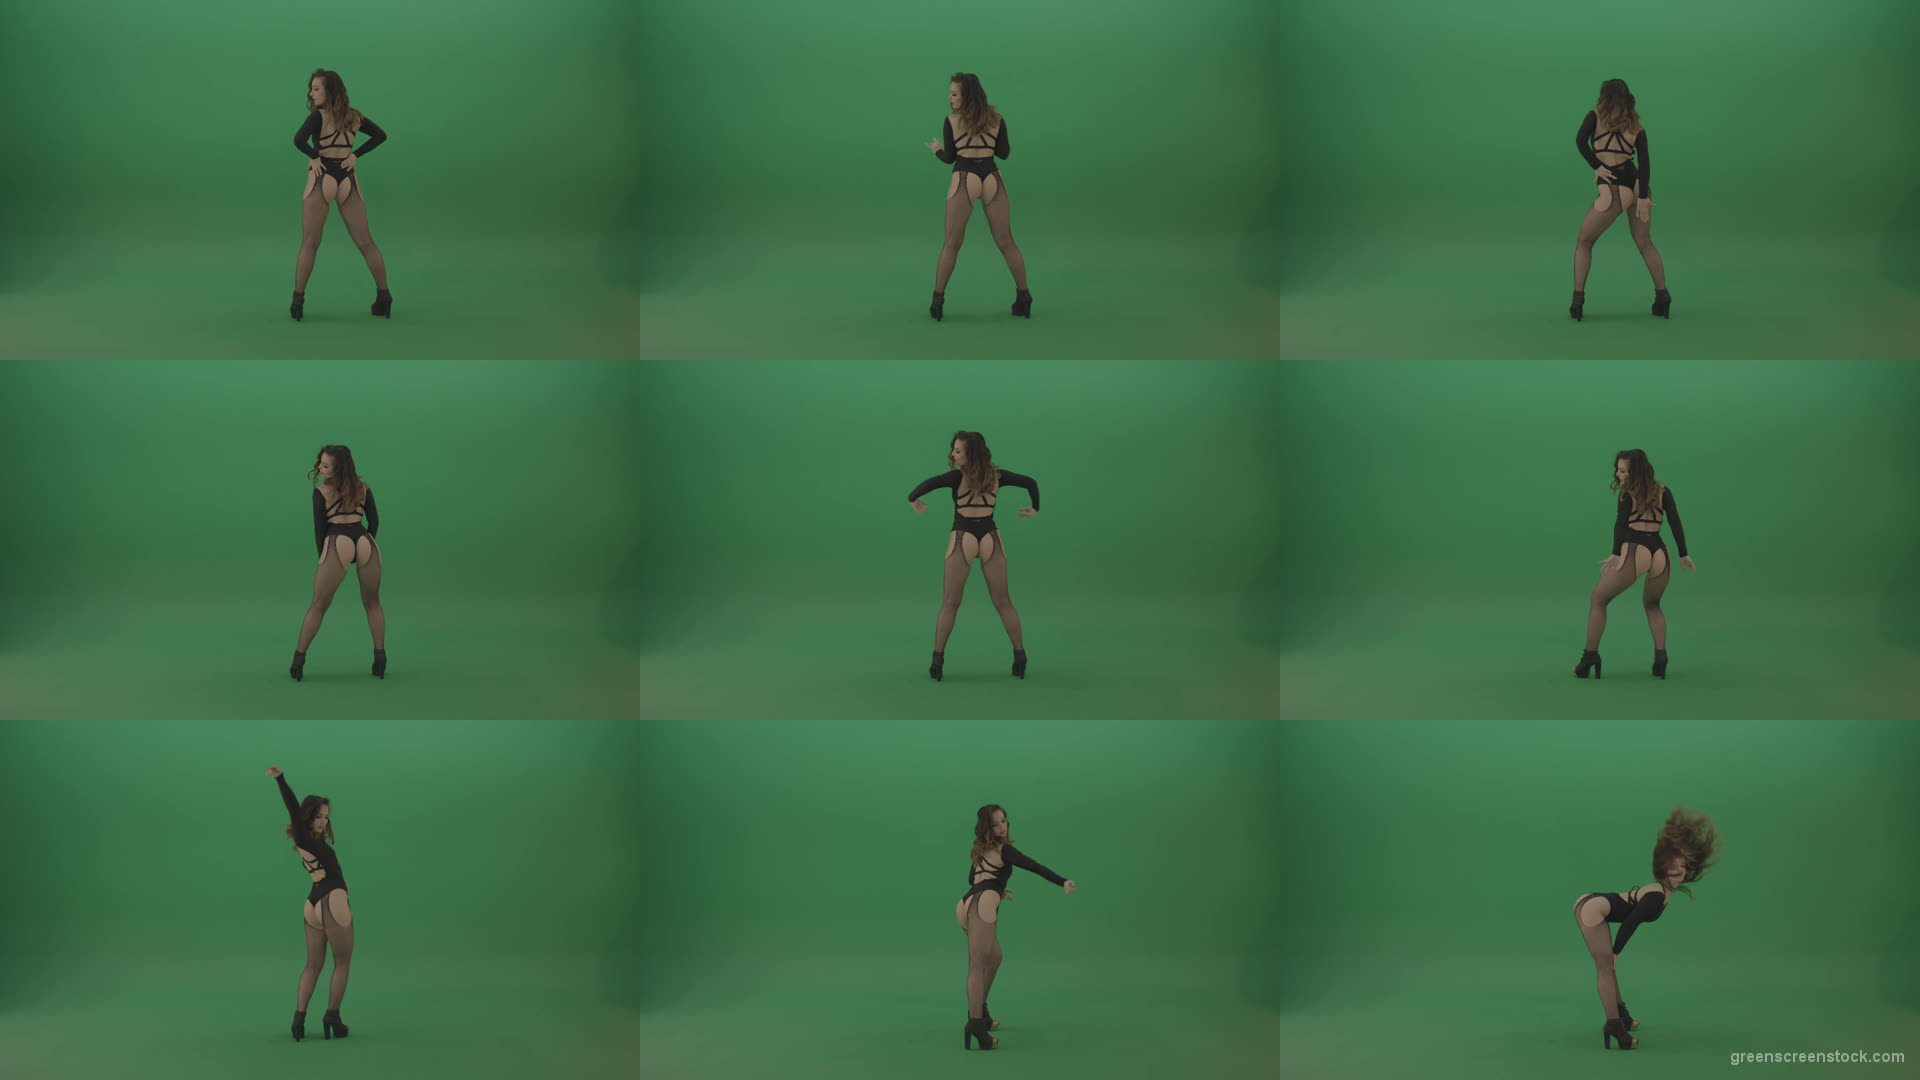 Beauty-girl-funny-shaking-the-ass-and-dancing-isolated-on-green-screen-1920 Green Screen Stock